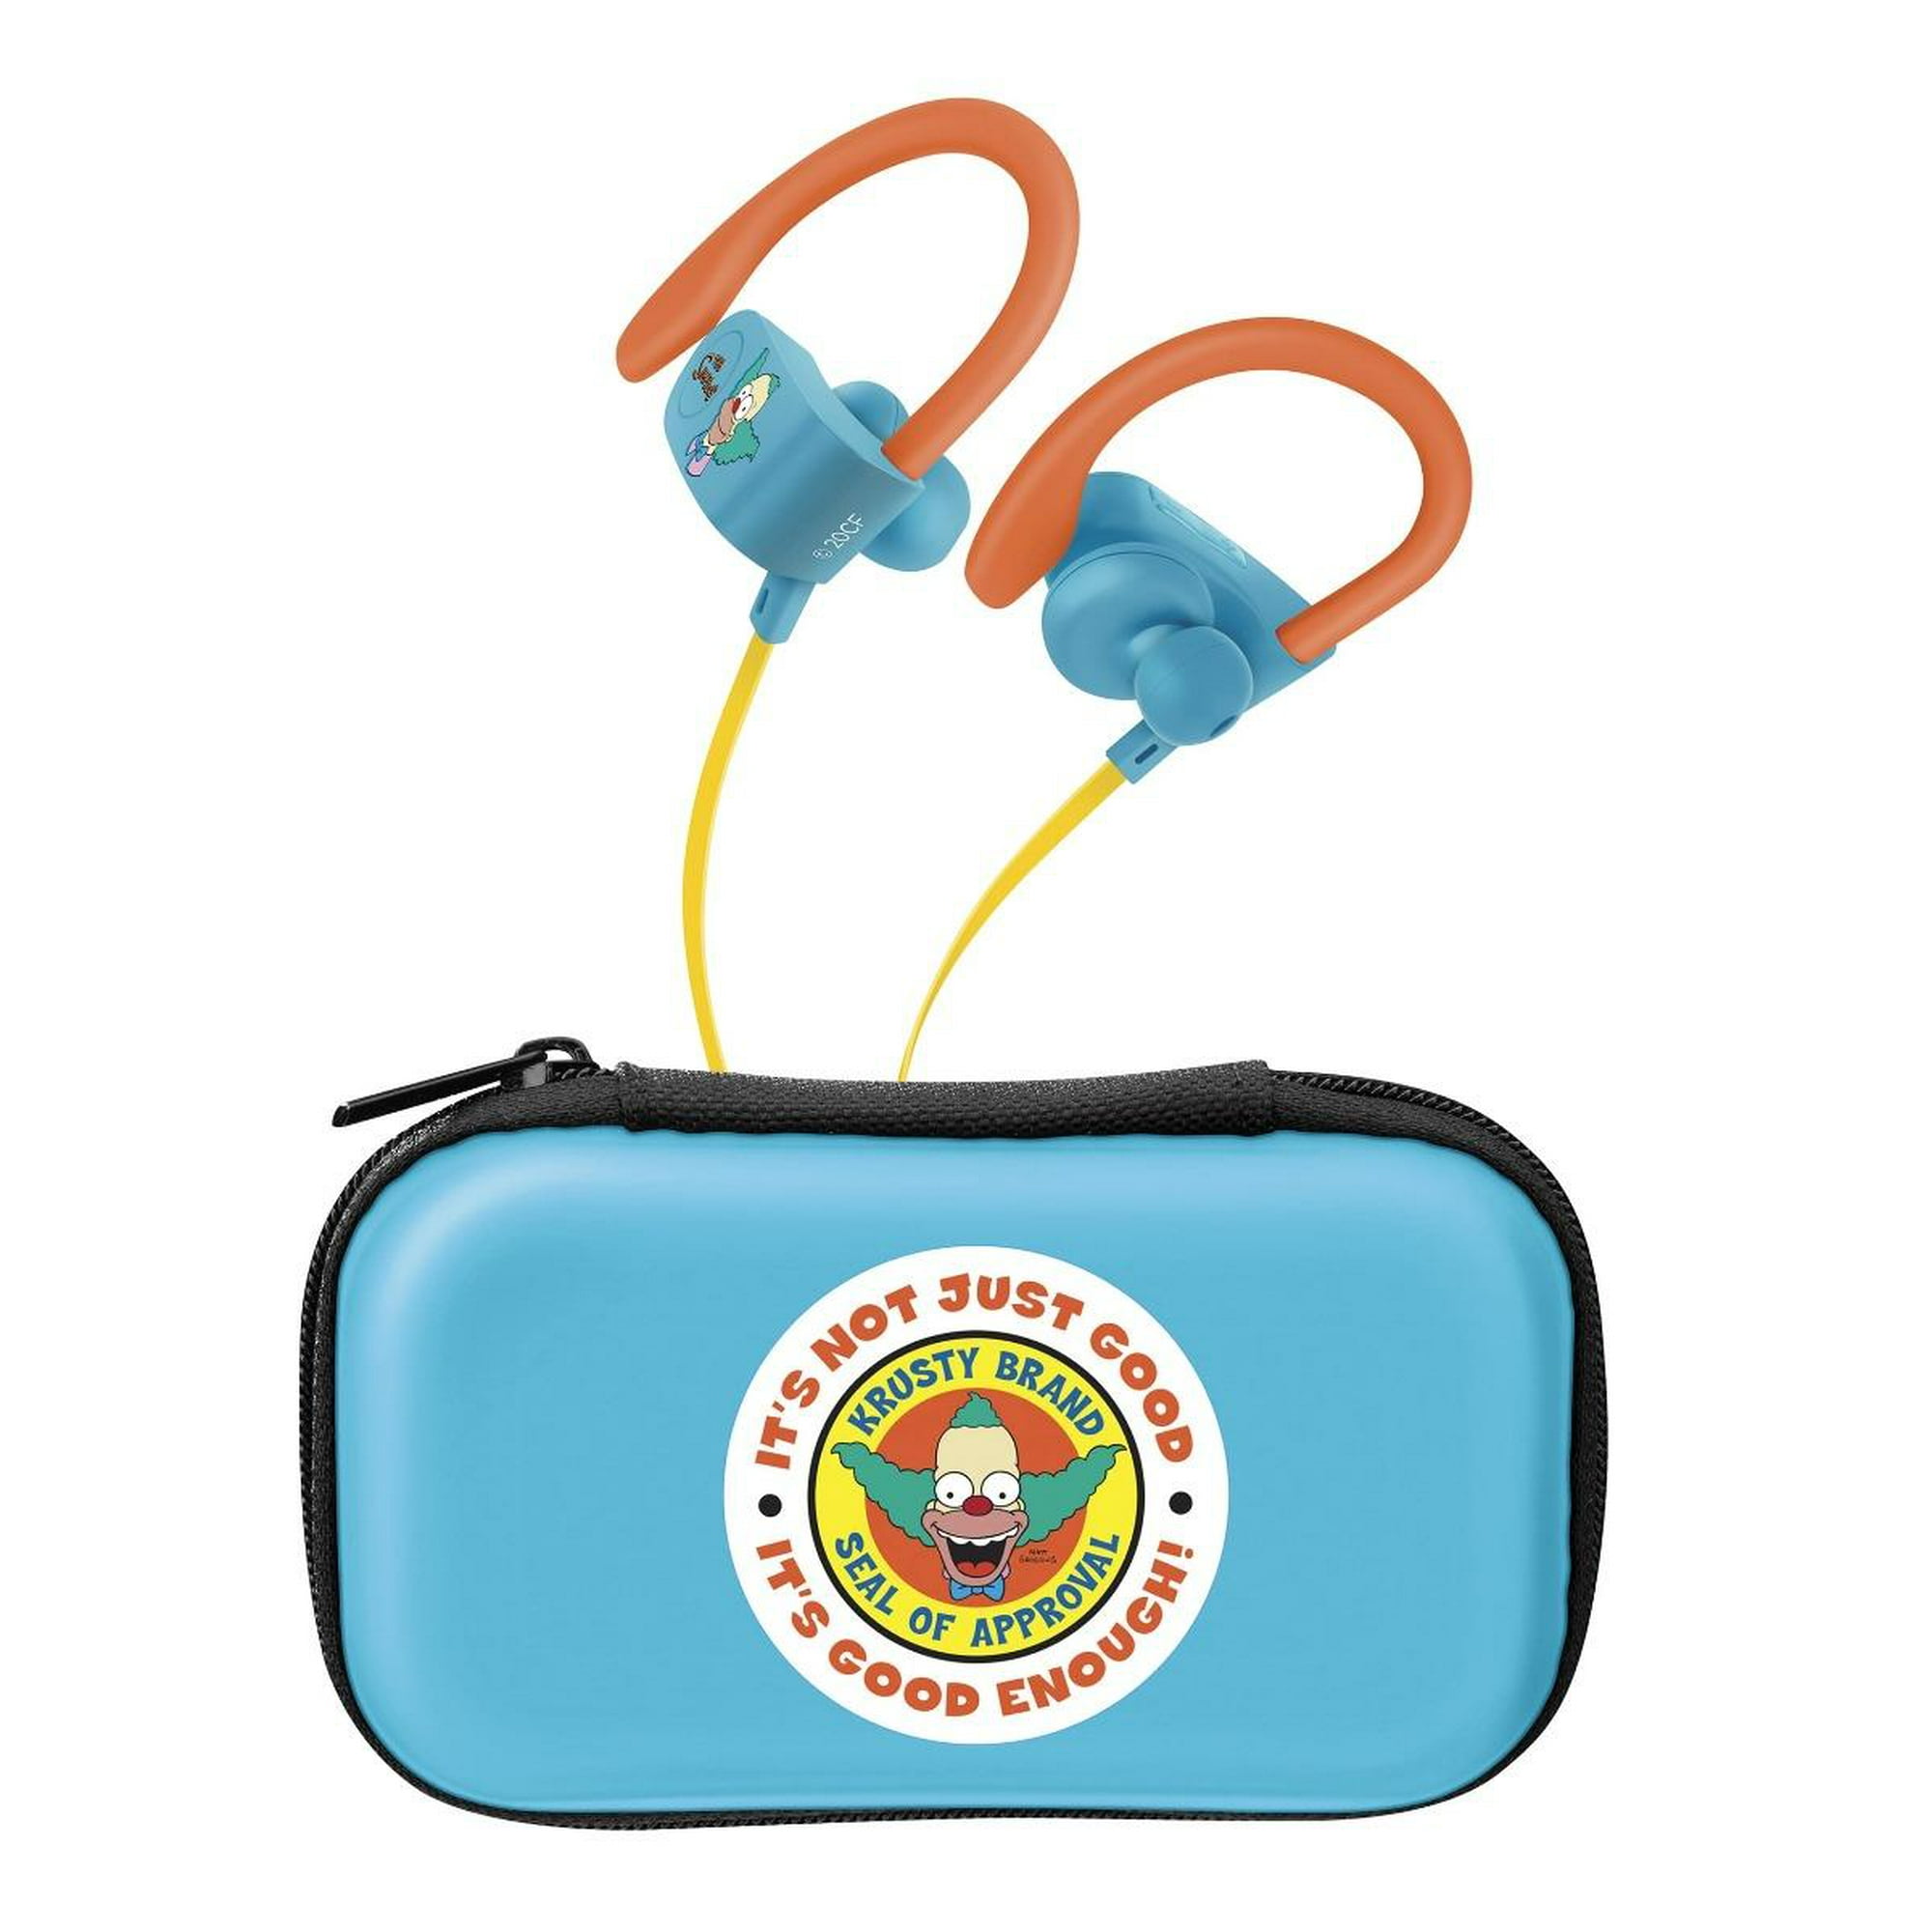 Audífonos bluetooth sport free con cable plano the simpsons™-Krusty steren aud-795/S-Krusty